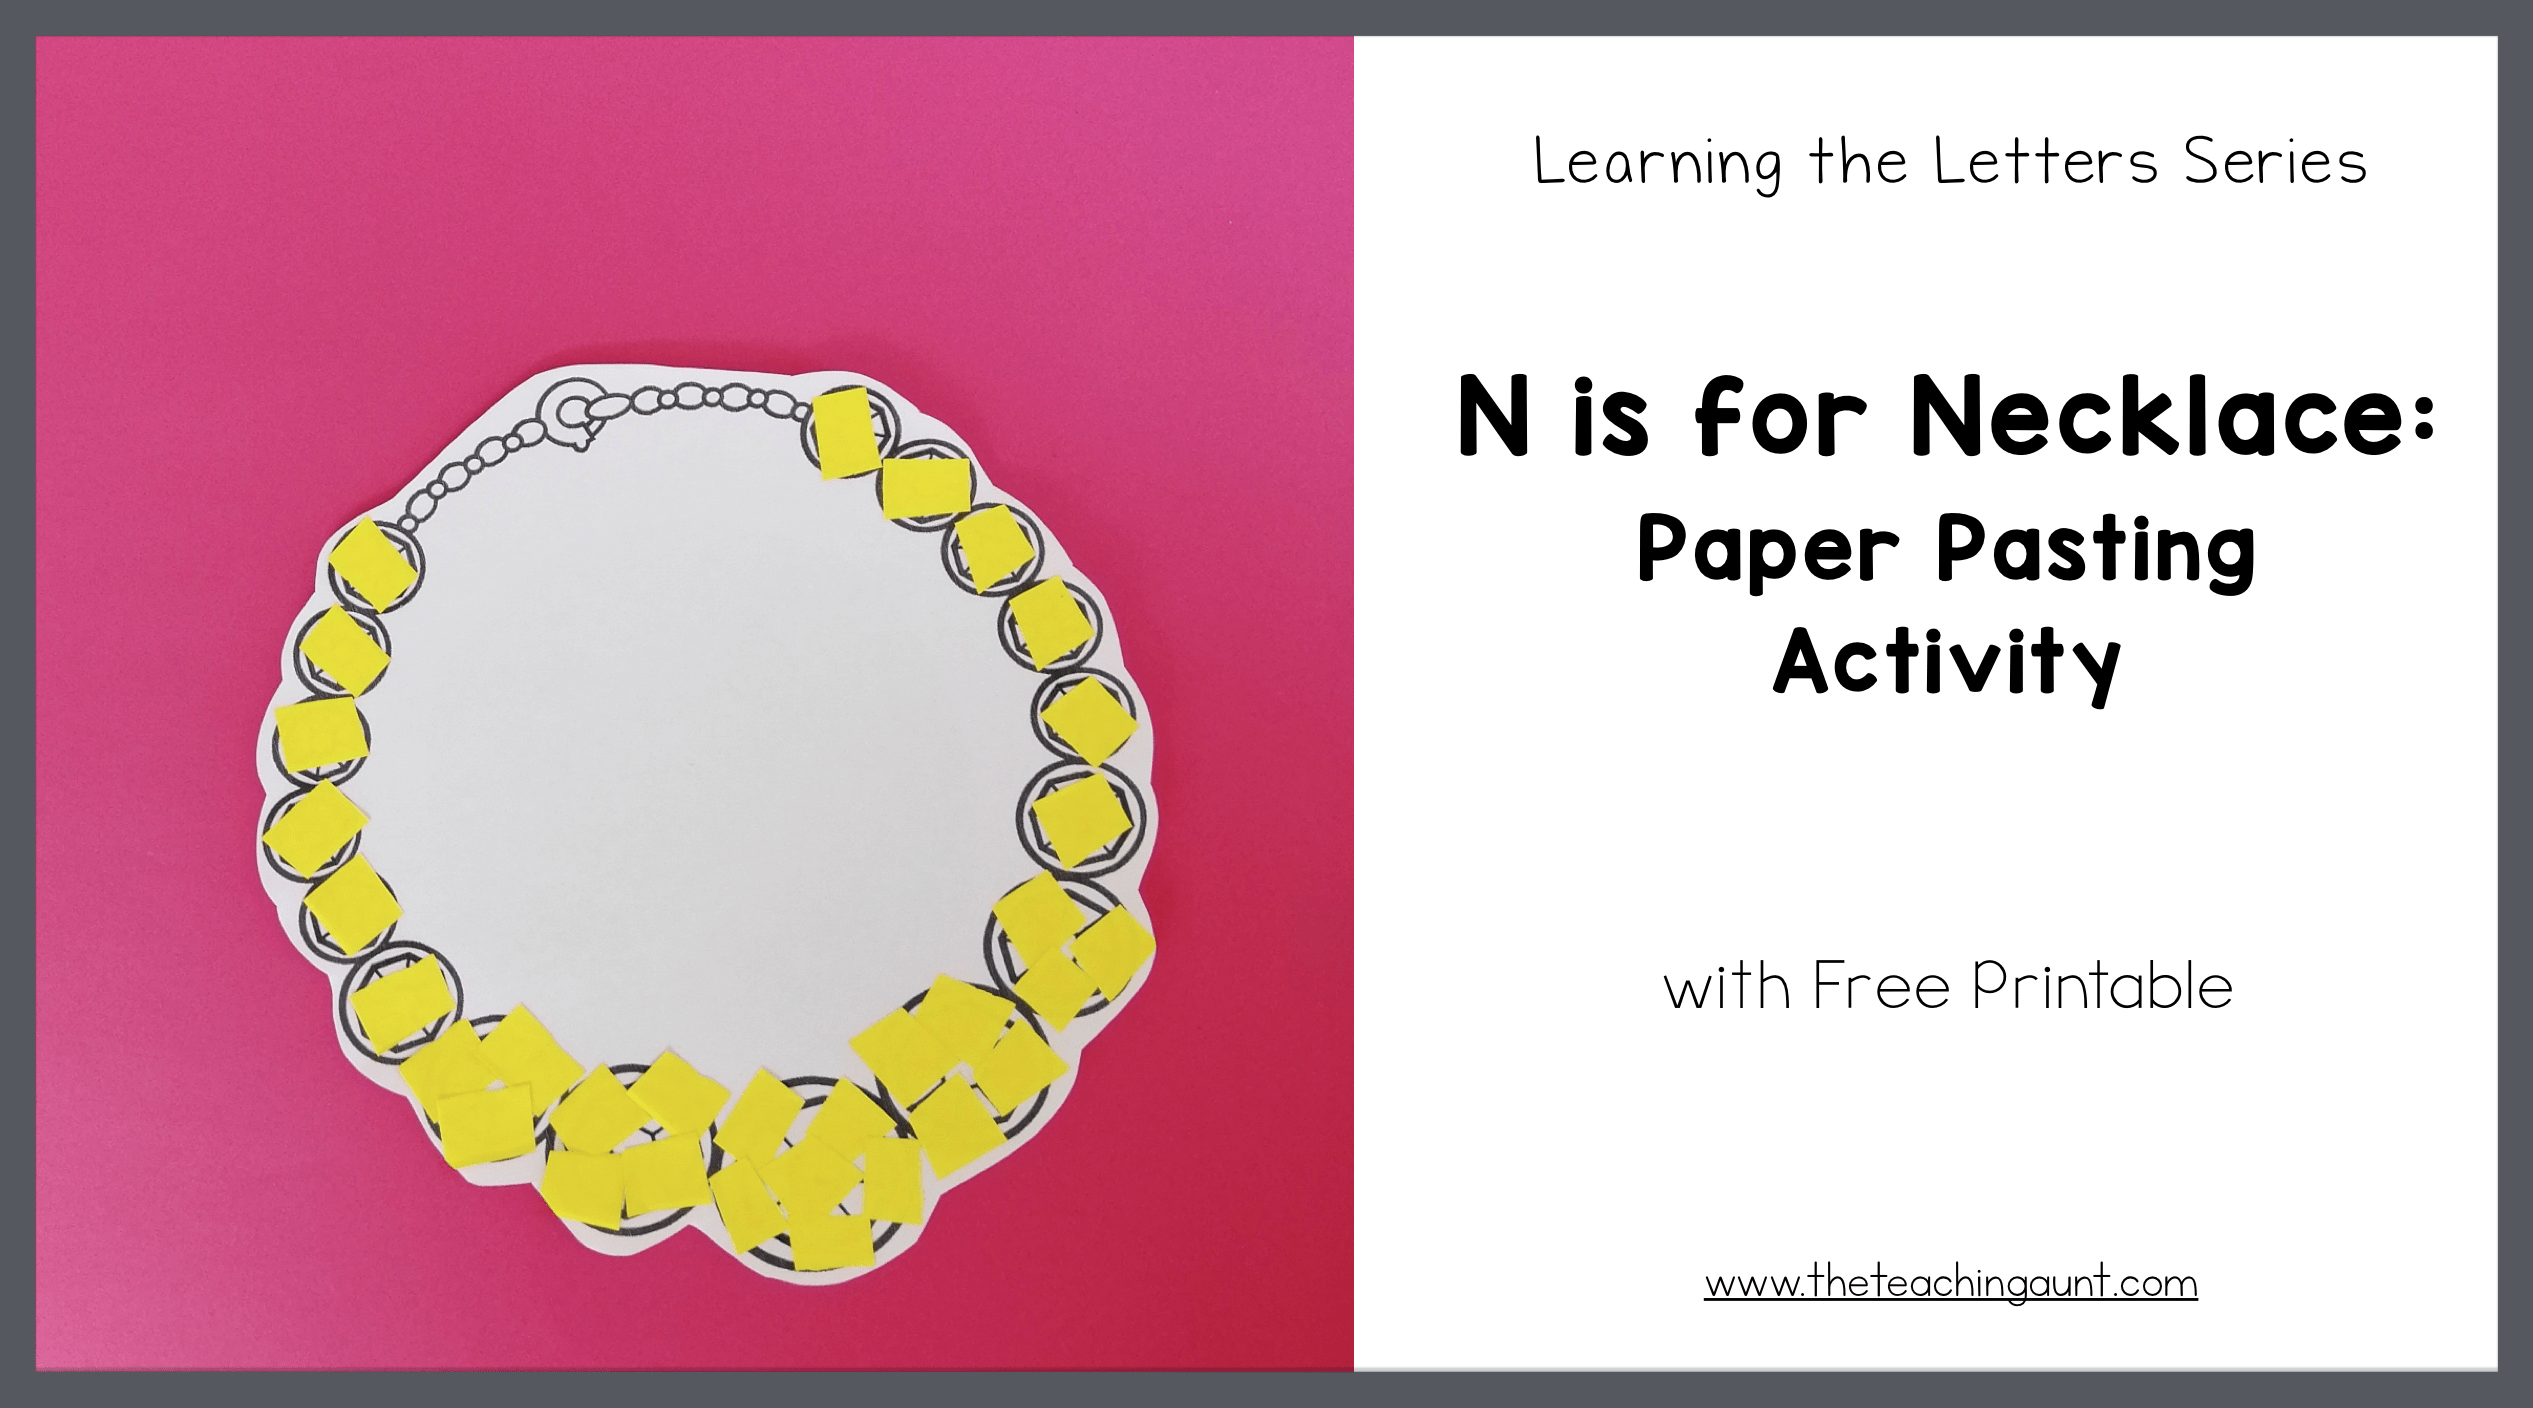 N is for Necklace: Paper Pasting Activity from The Teaching Aunt